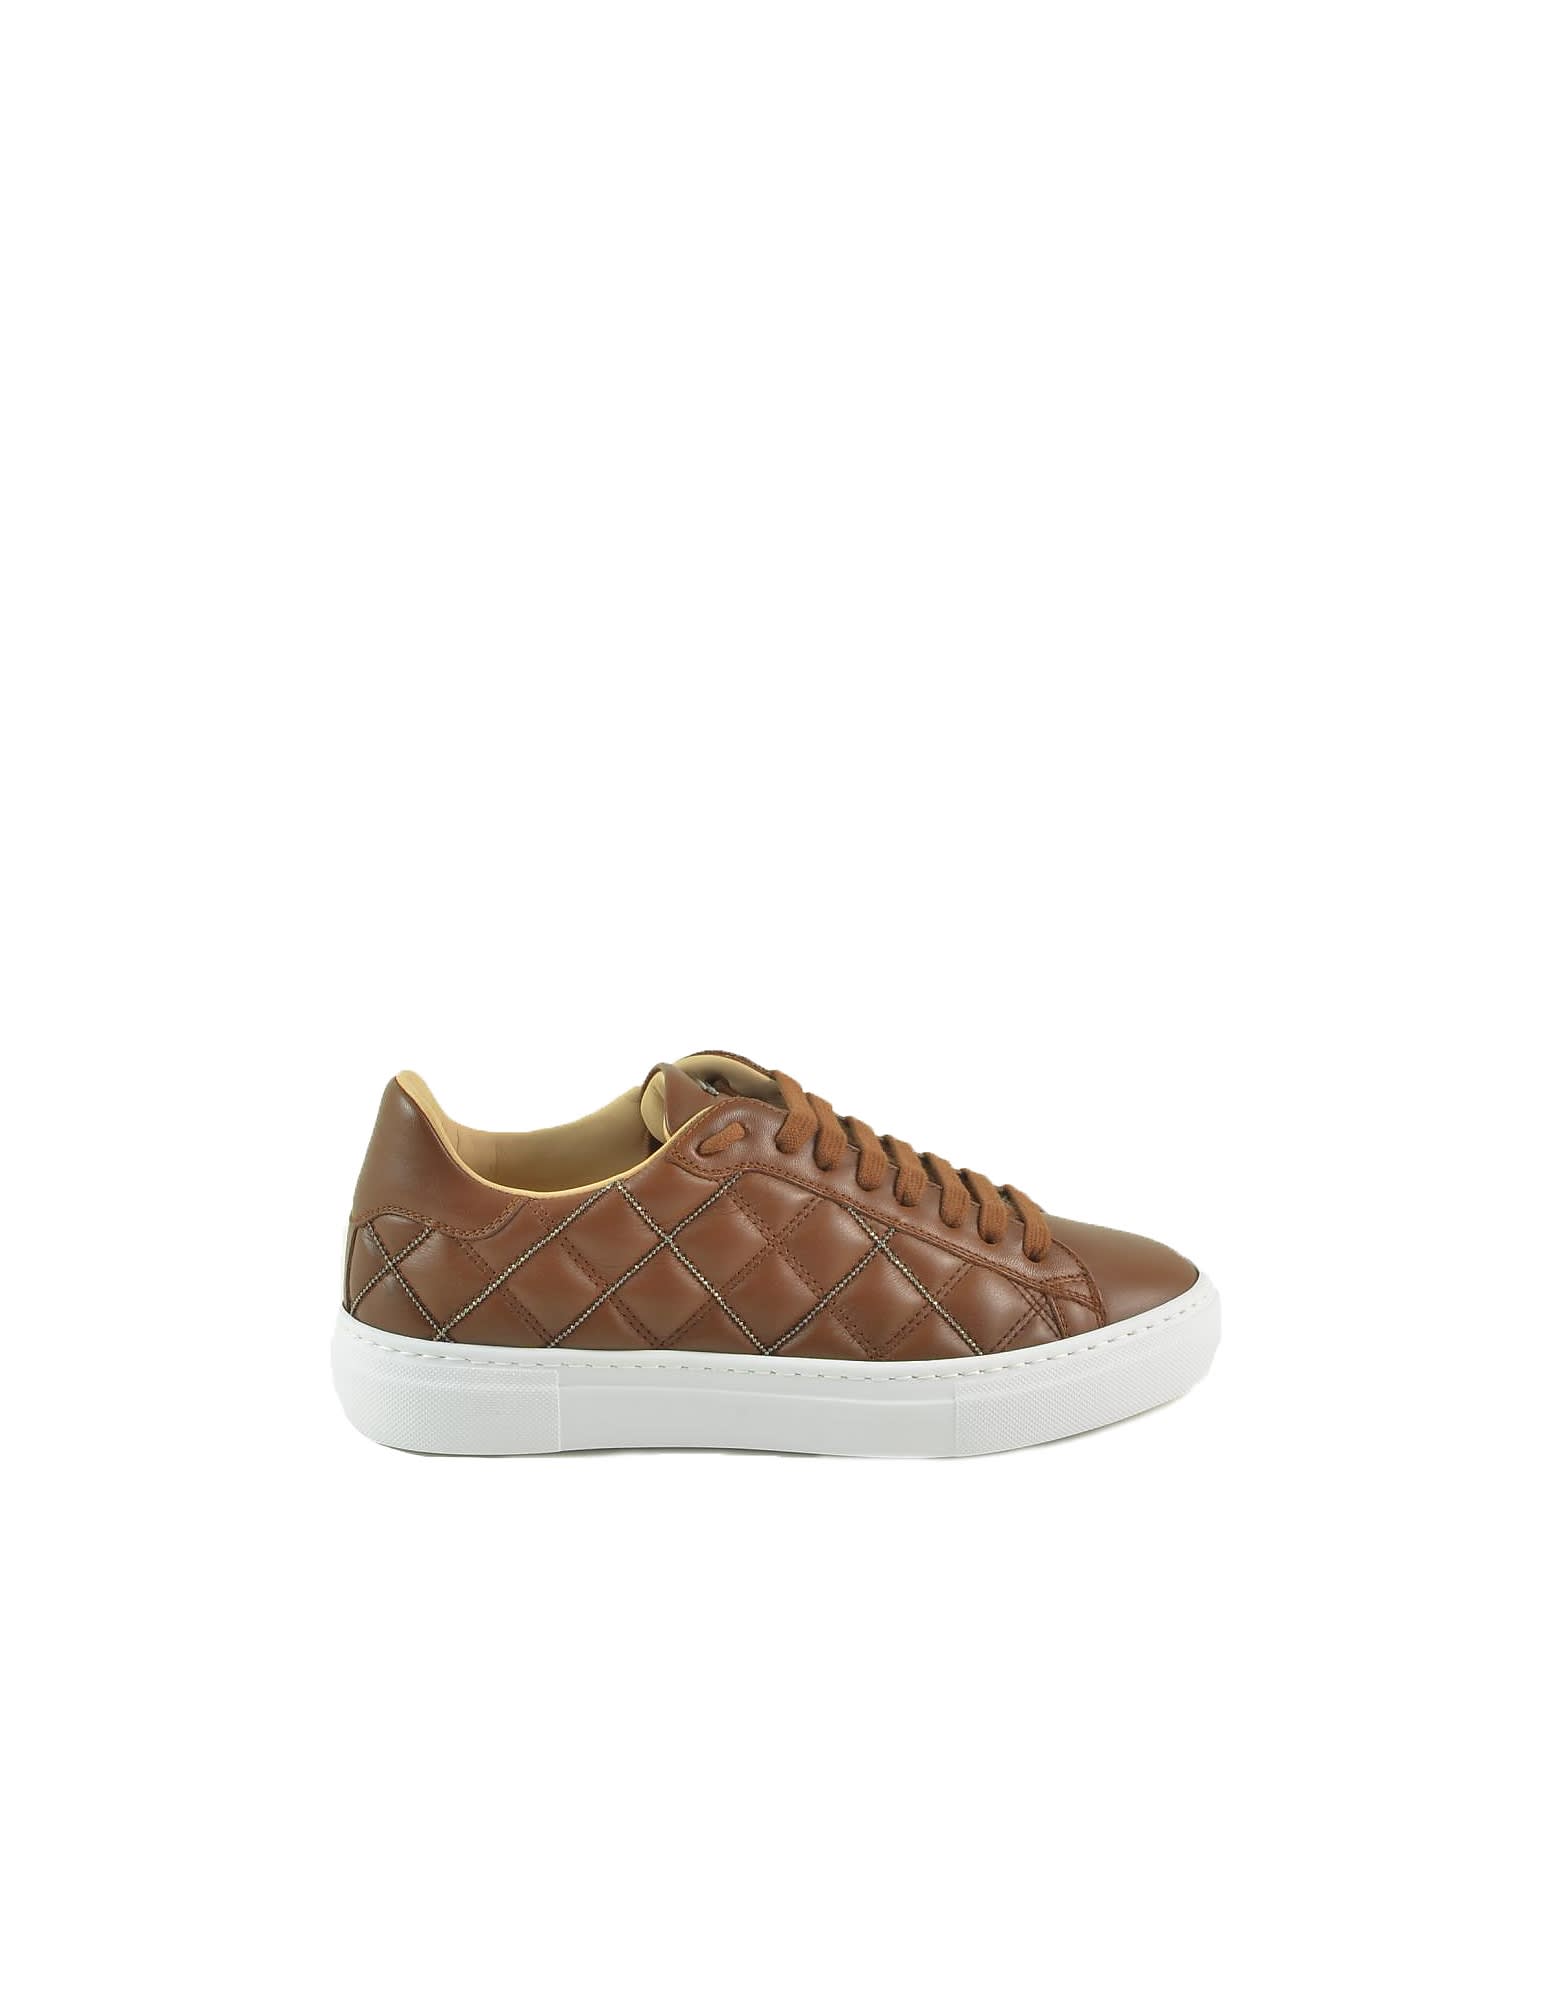 Fabiana Filippi Brown Quilted Womens Flat Sneakers